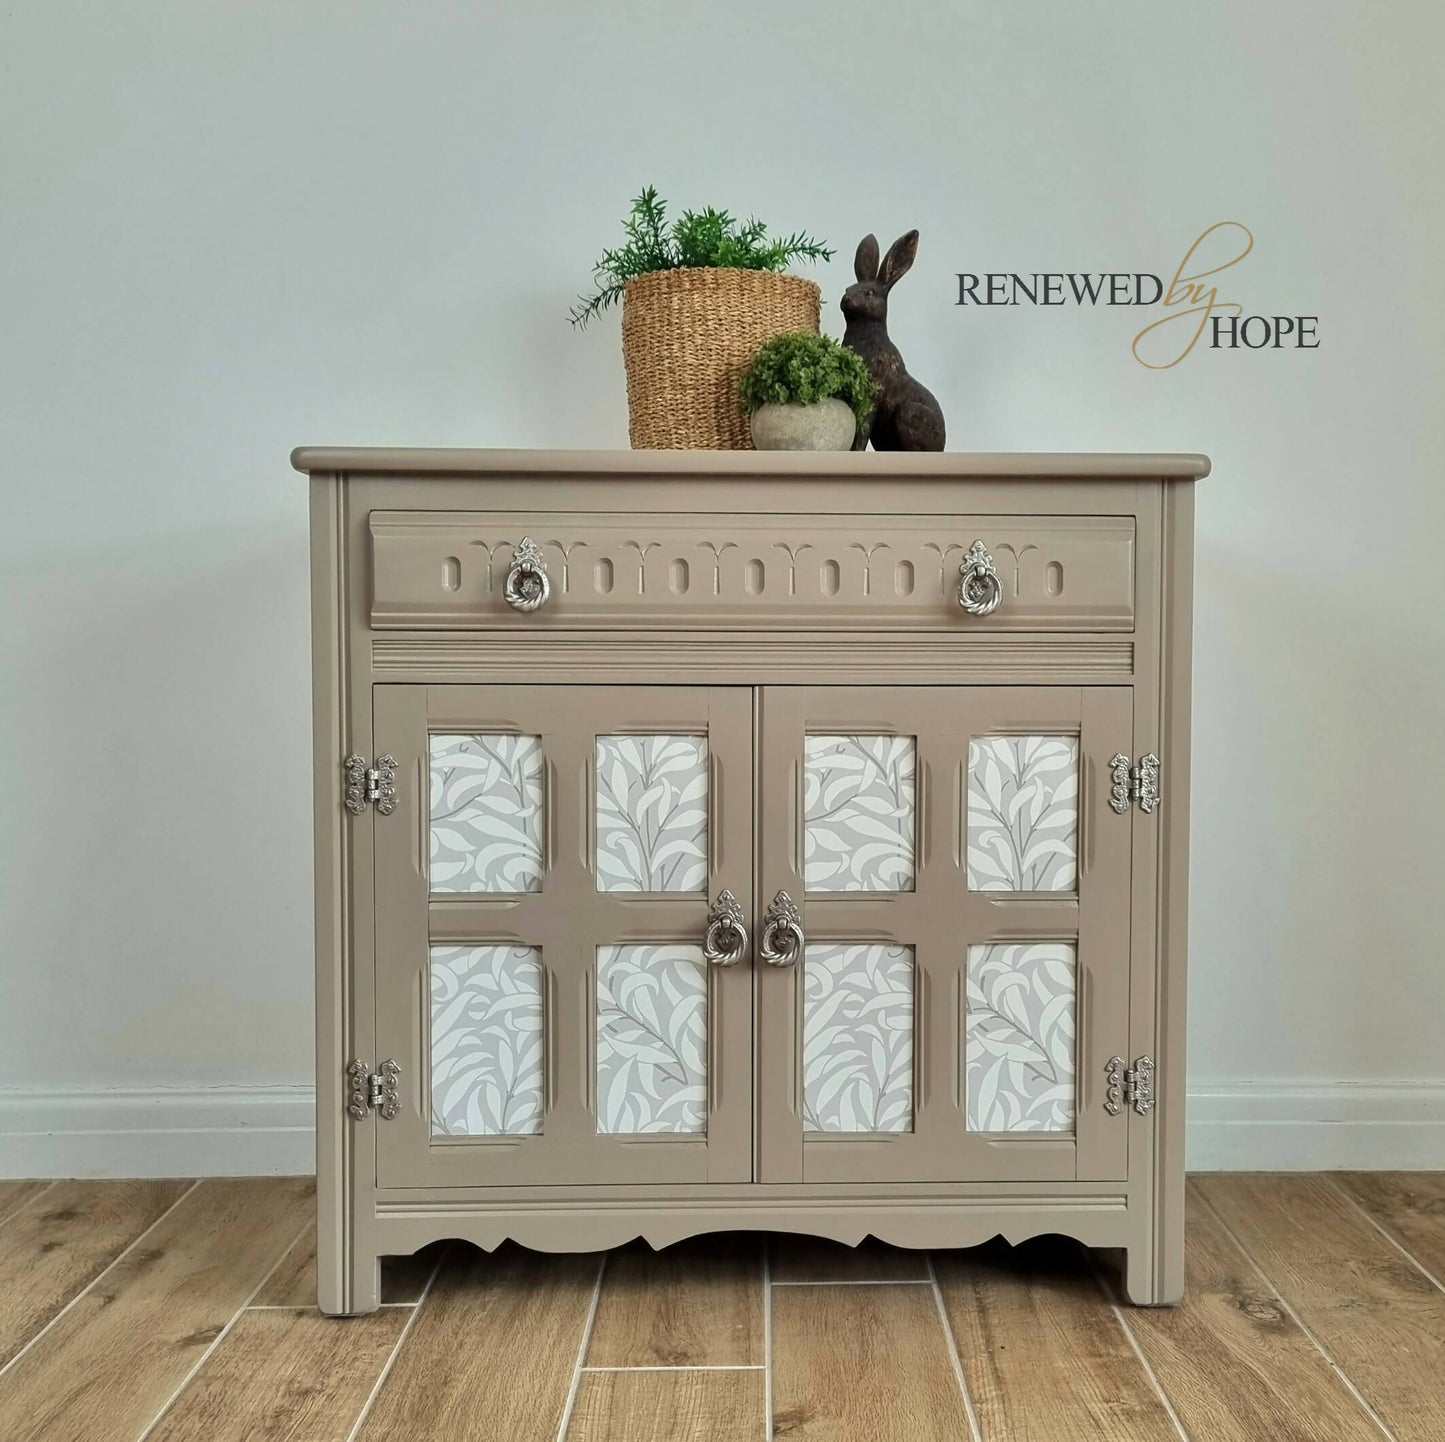 SOLD - Neutral Sideboard, Old Charm Solid Oak Sideboard, Vintage Sideboard, William Morris Willow Bough, Small Hallway Storage Cupboard, Taupe